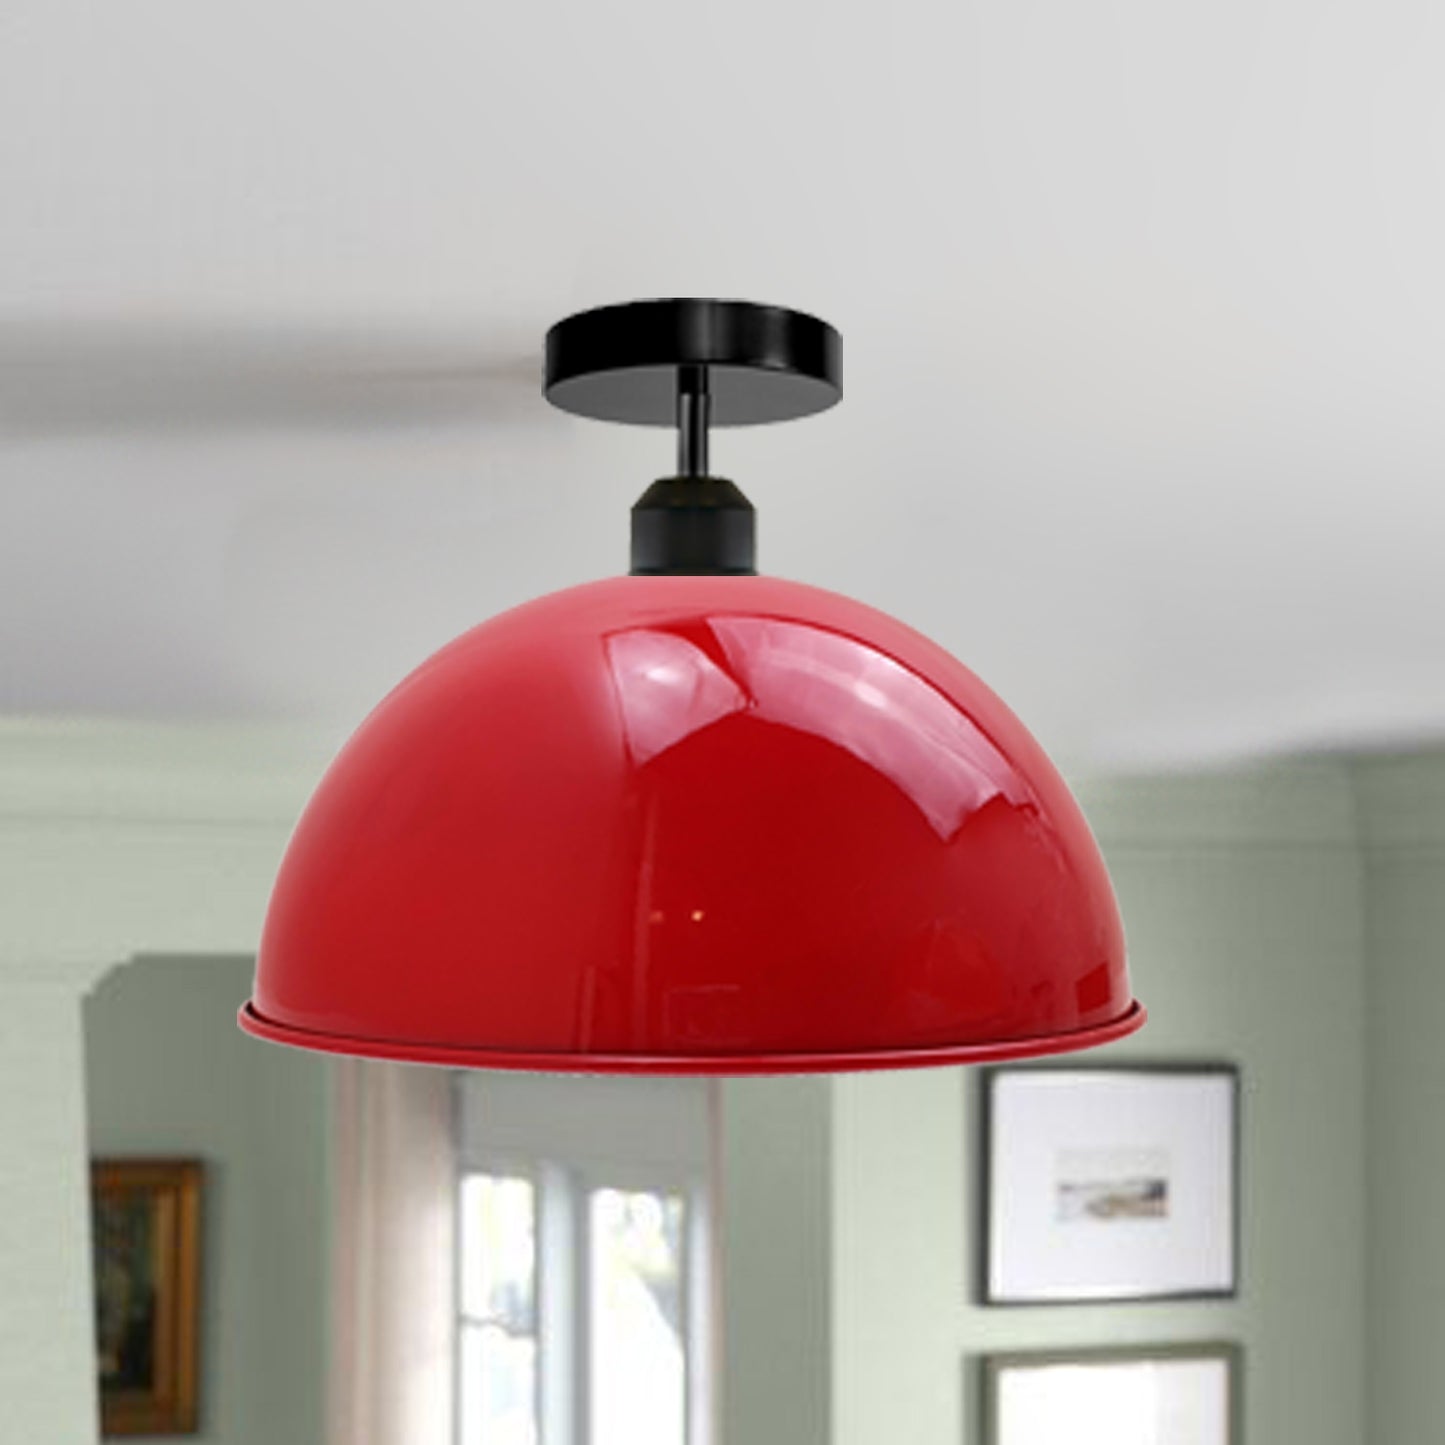 Metal E27 Industrial Retro vintage style Dome Shade ceiling light~2193